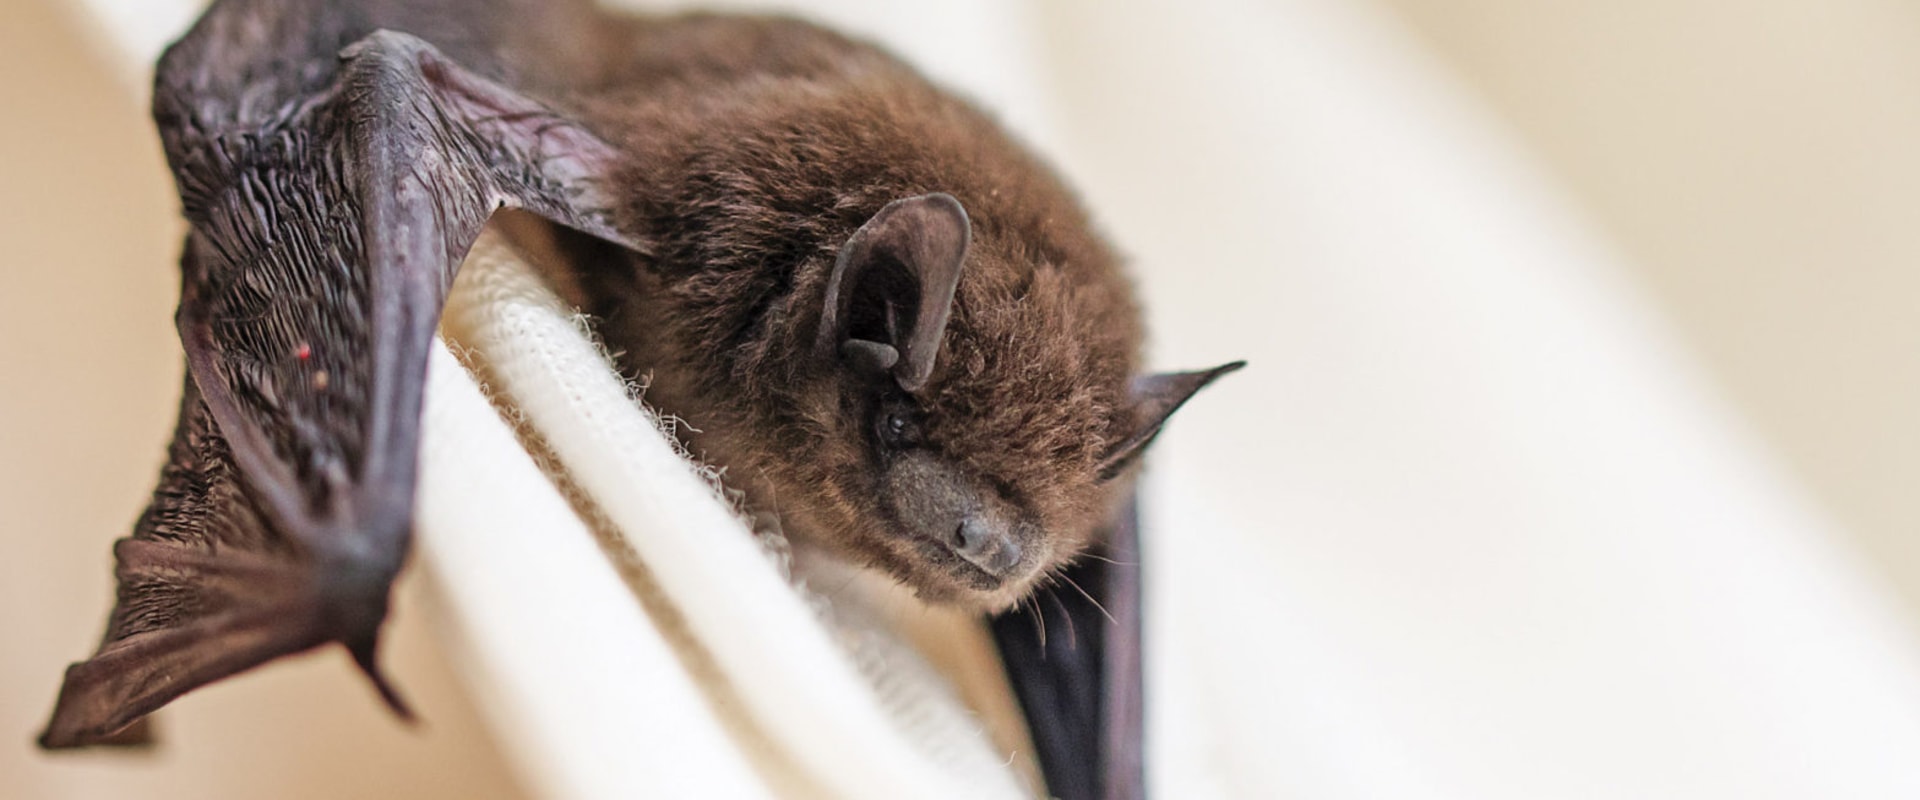 How do you stop bats from coming back?